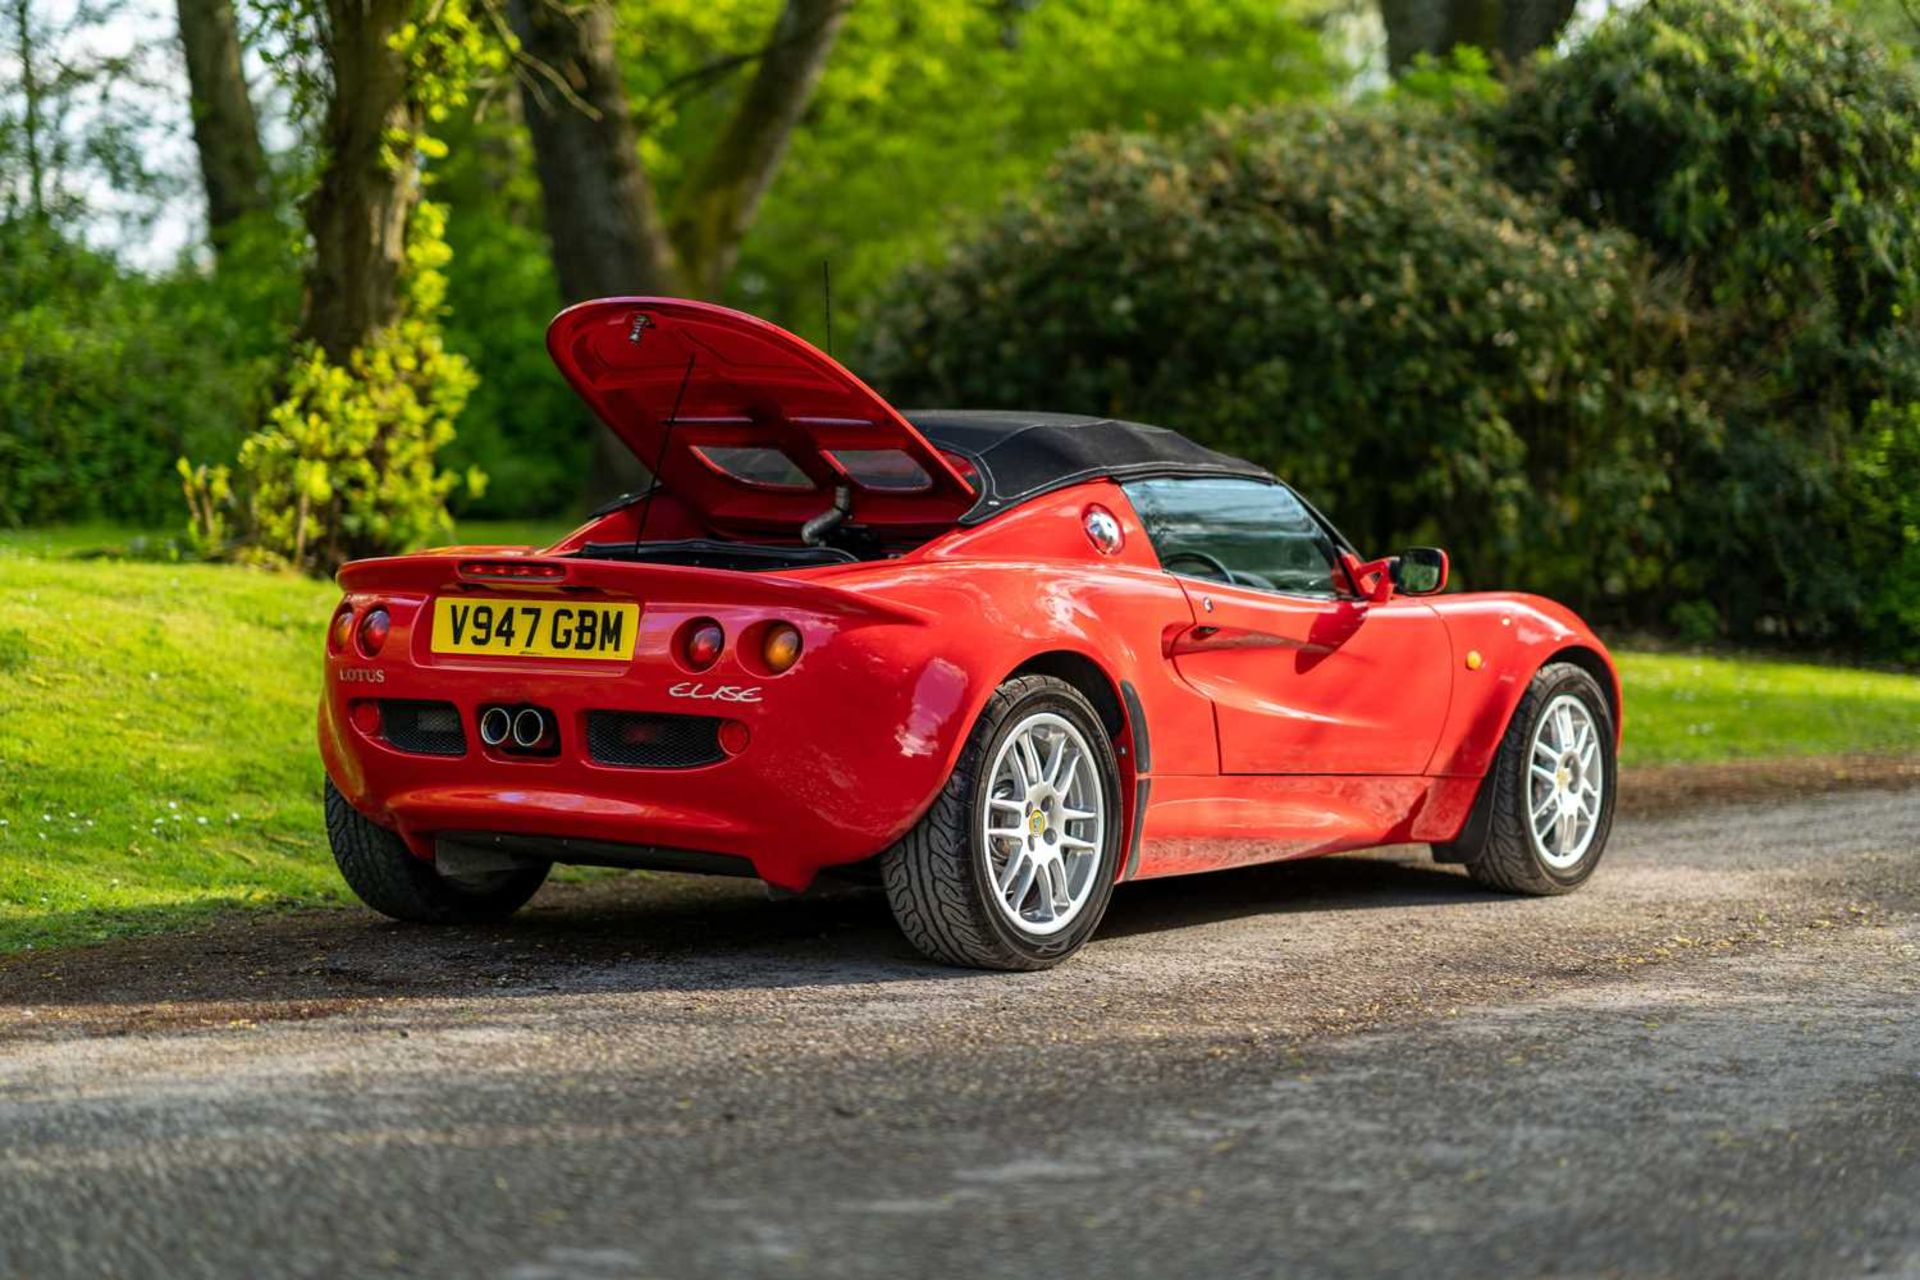 1999 Lotus Elise S1 Only 39,000 miles from new - Image 51 of 57